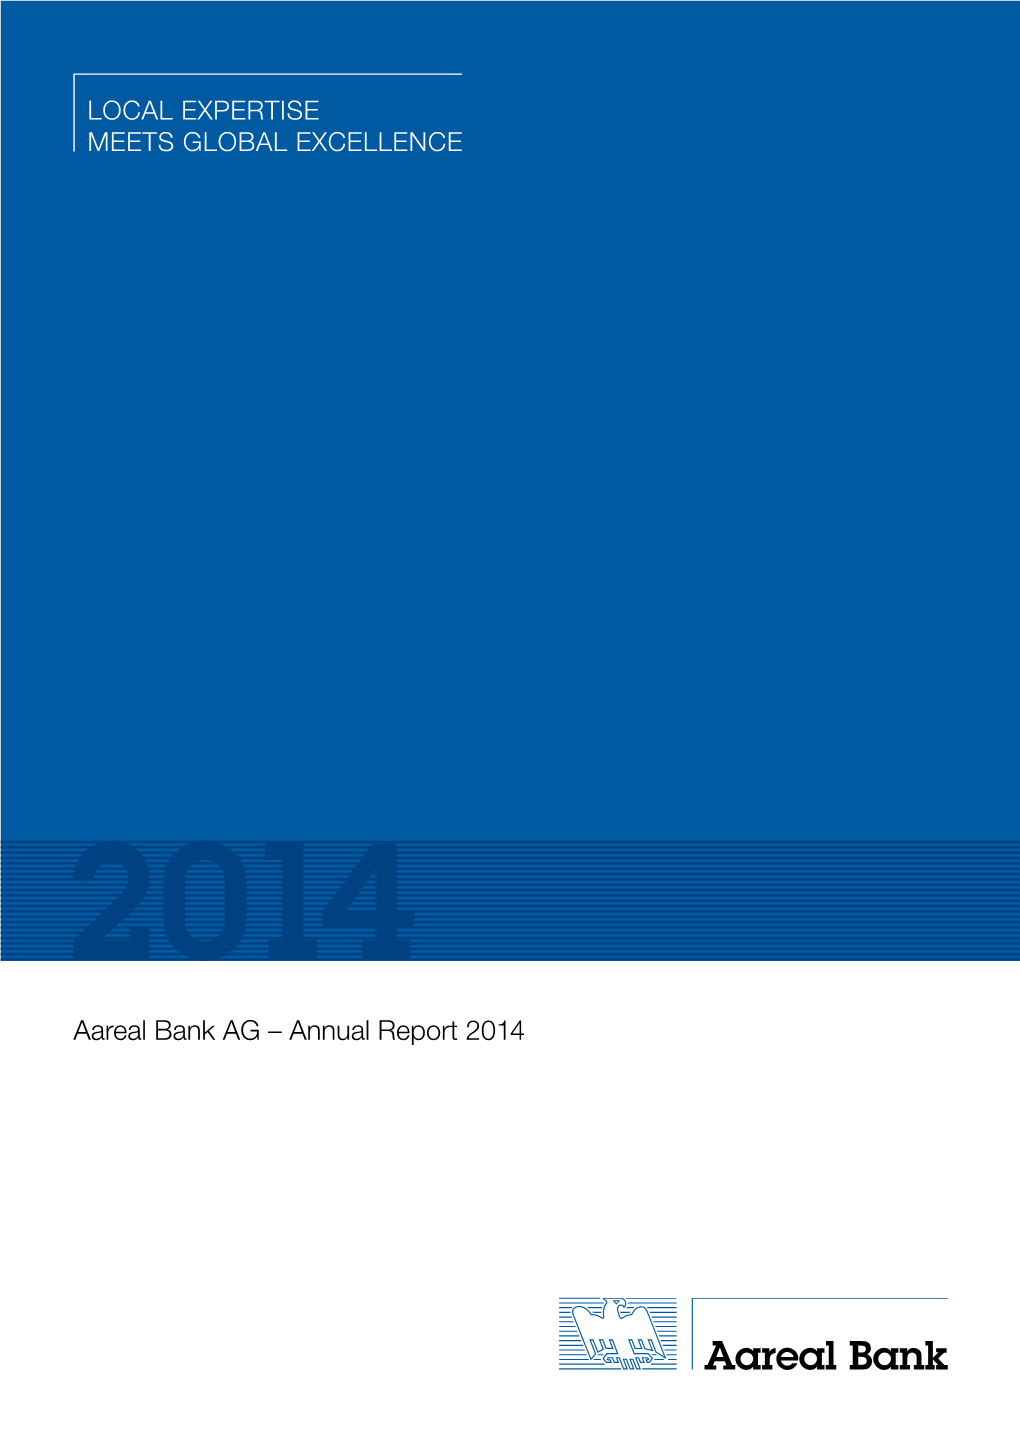 Annual Report 2014 Aareal Bank AG – Annual Report 2014 | Management Report 2